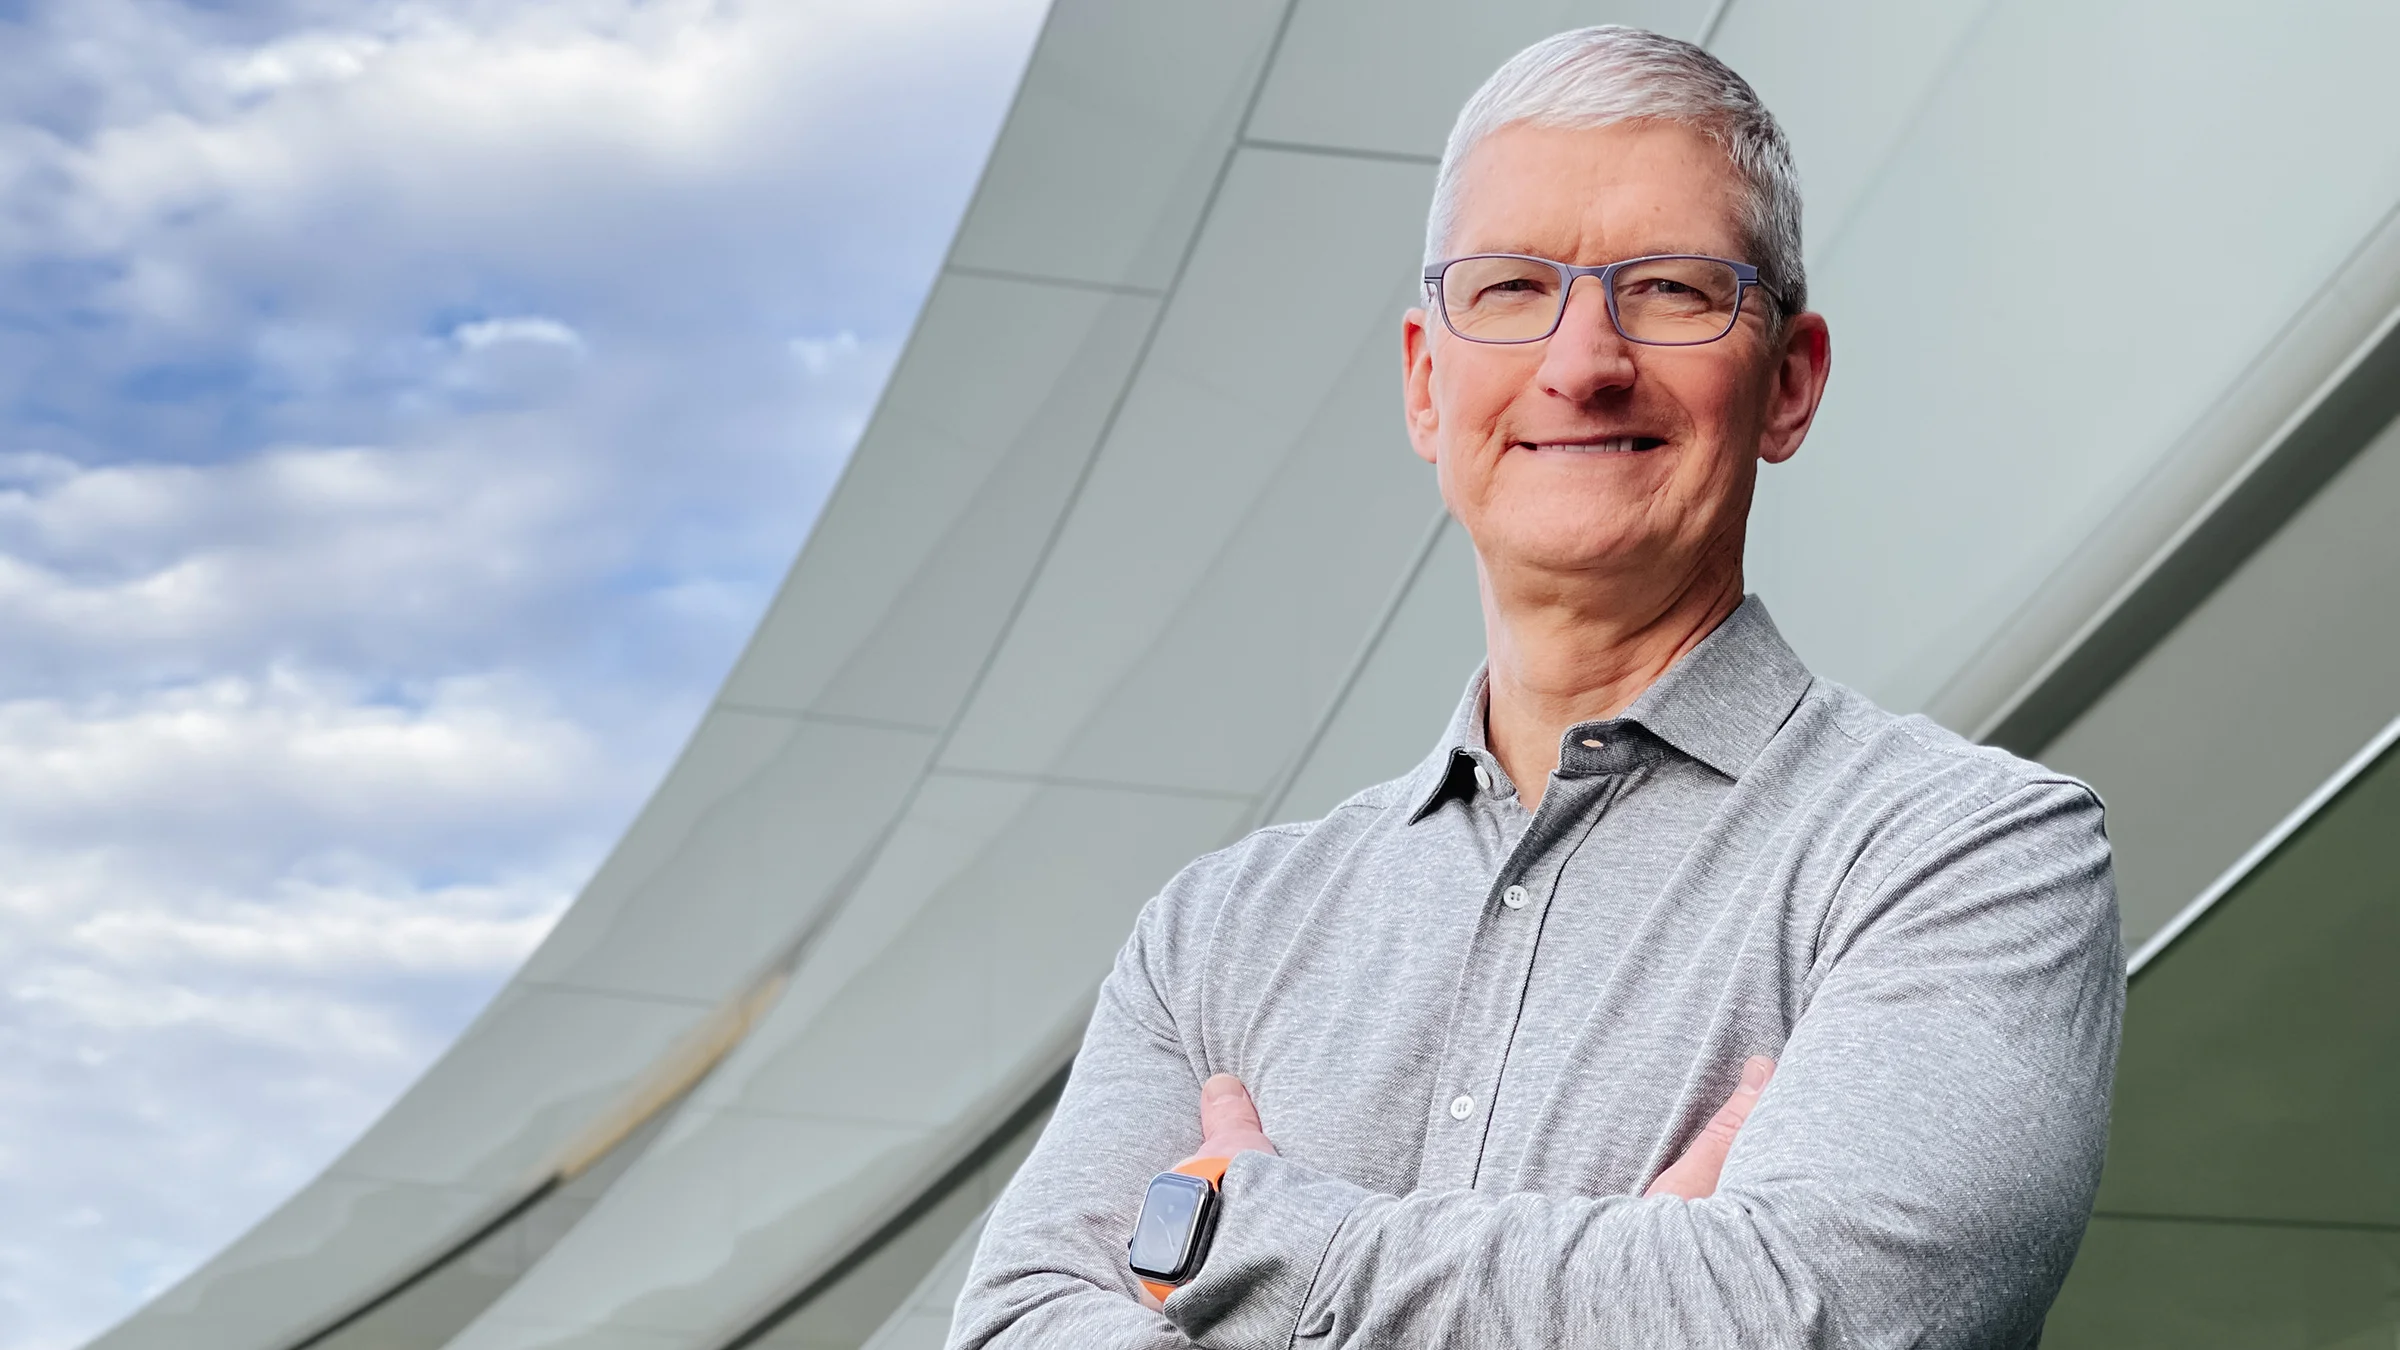 Who Will Take the Reins at Apple? Peek Into the Future as Tim Cook Ponders Succession